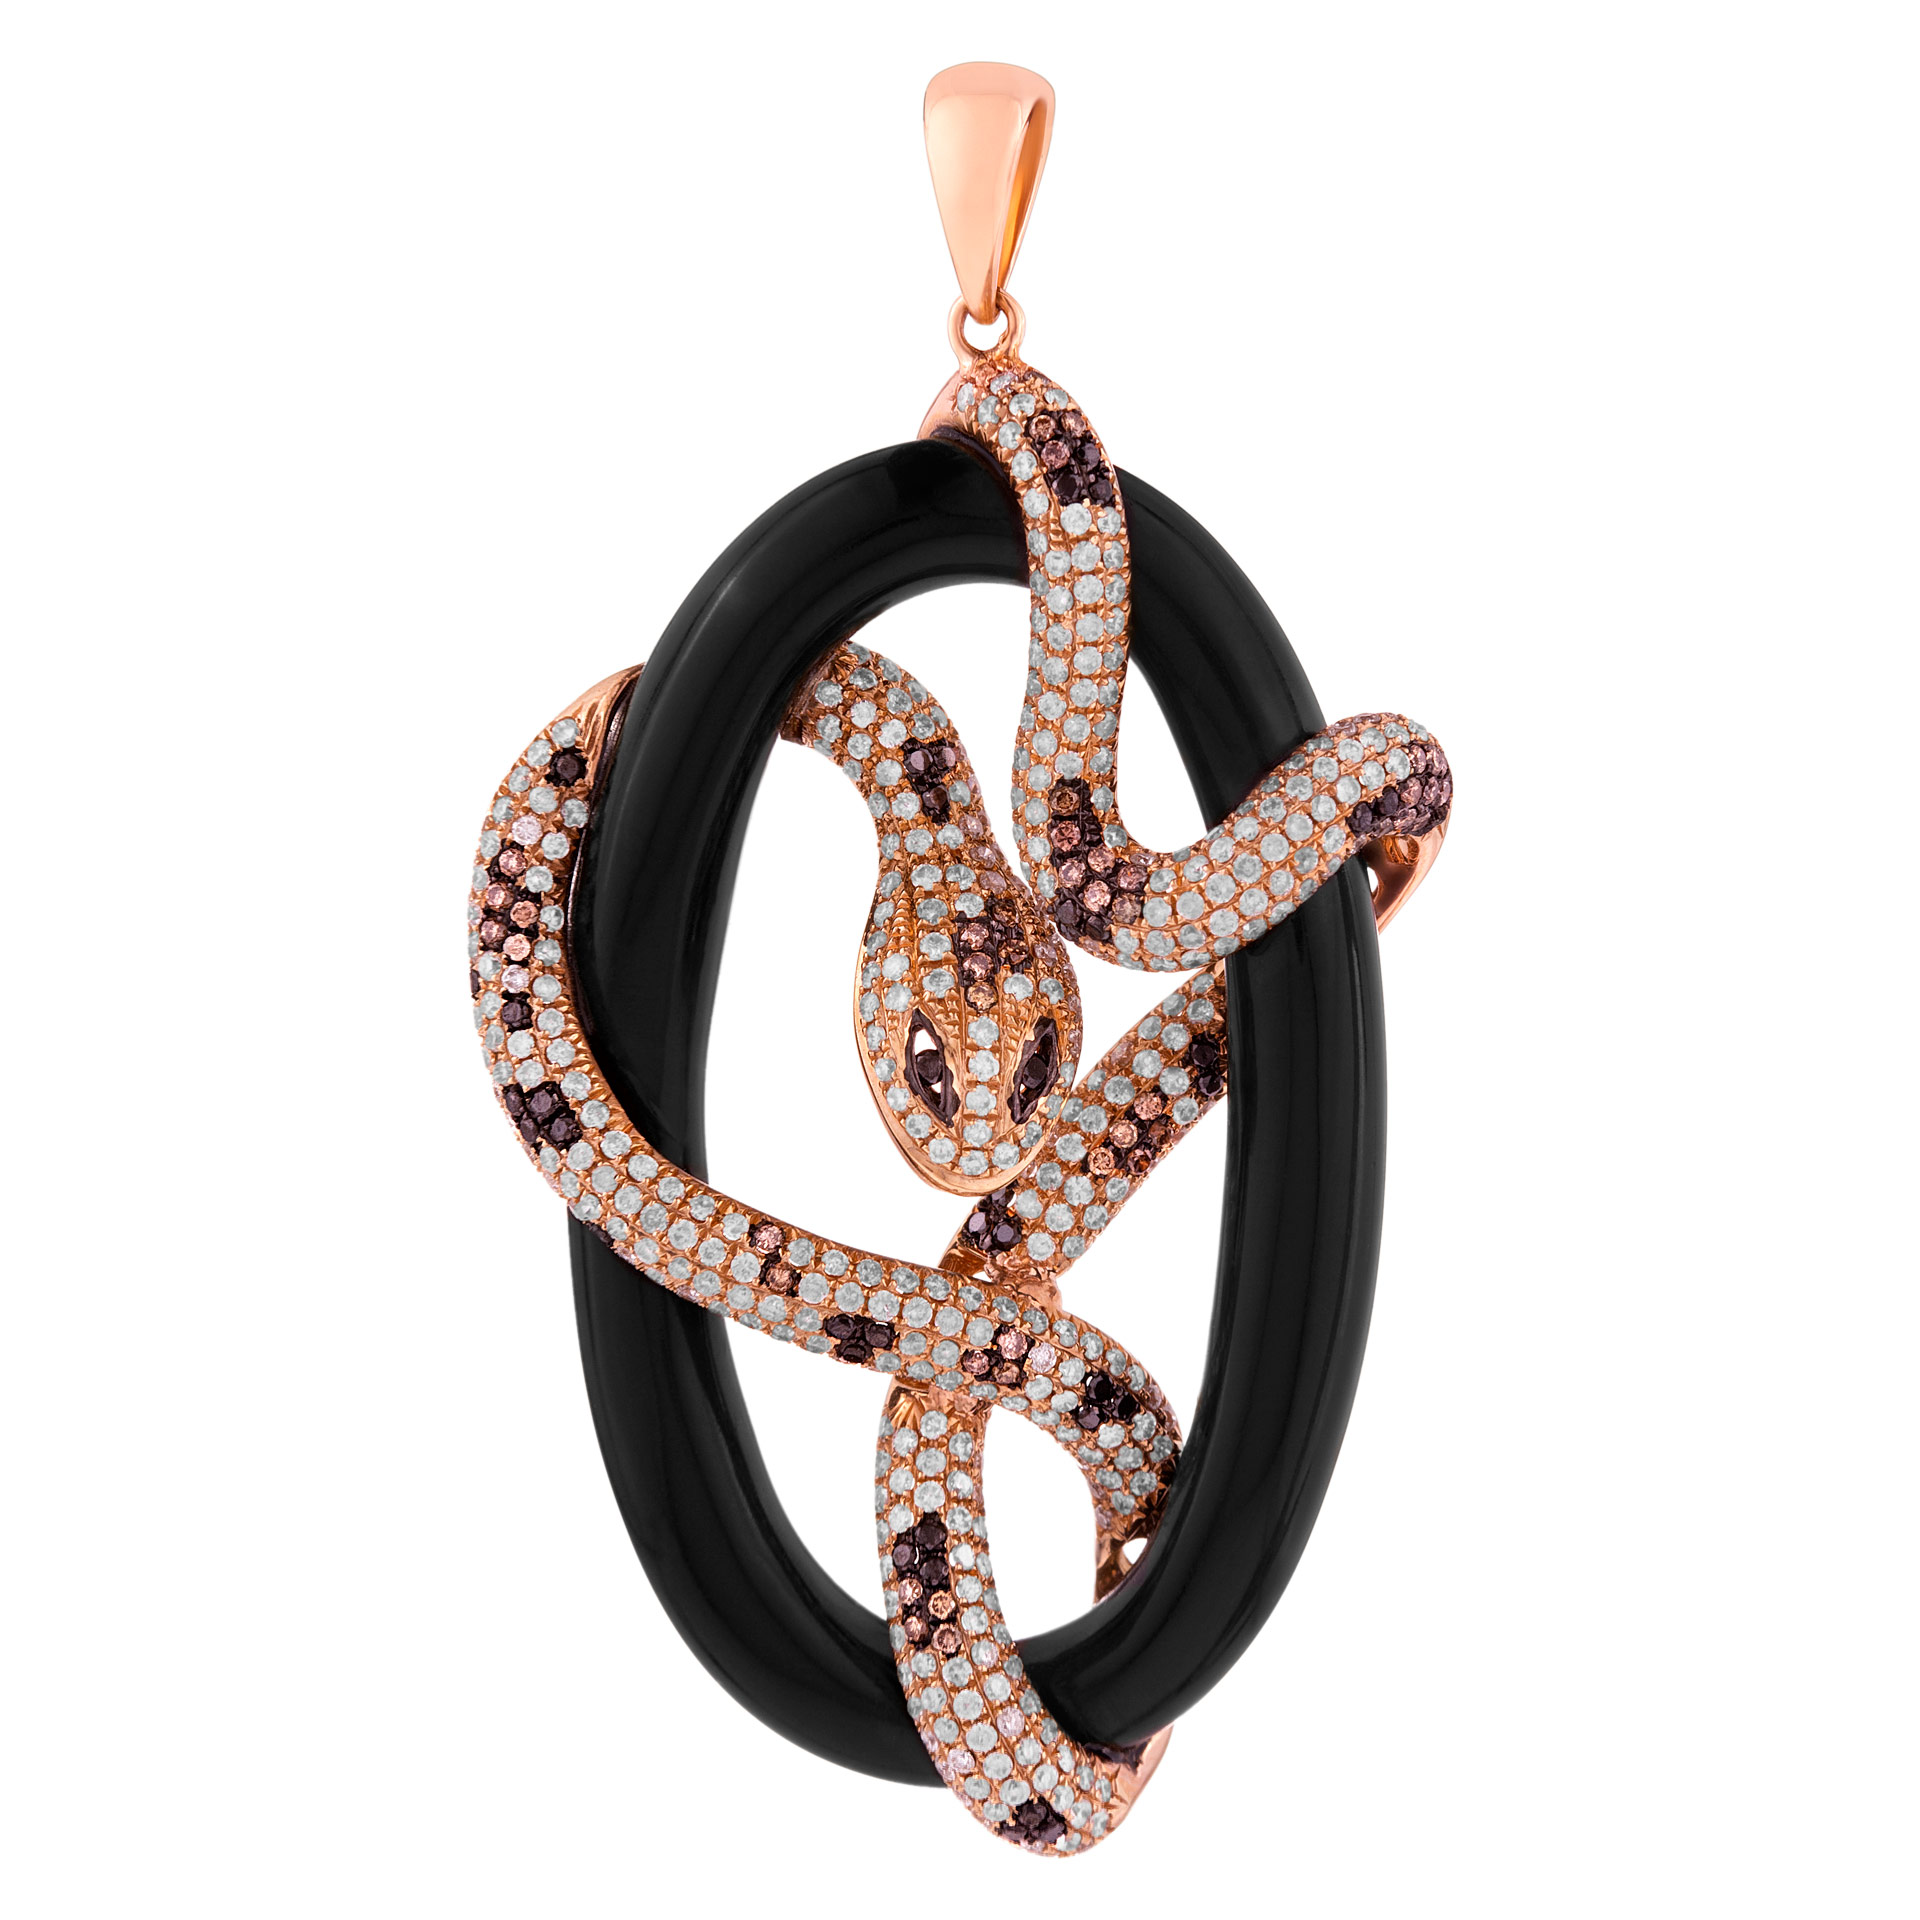 Snake pendant in onyx, diamonds and 18K pink gold. 21.26cts of Onyx